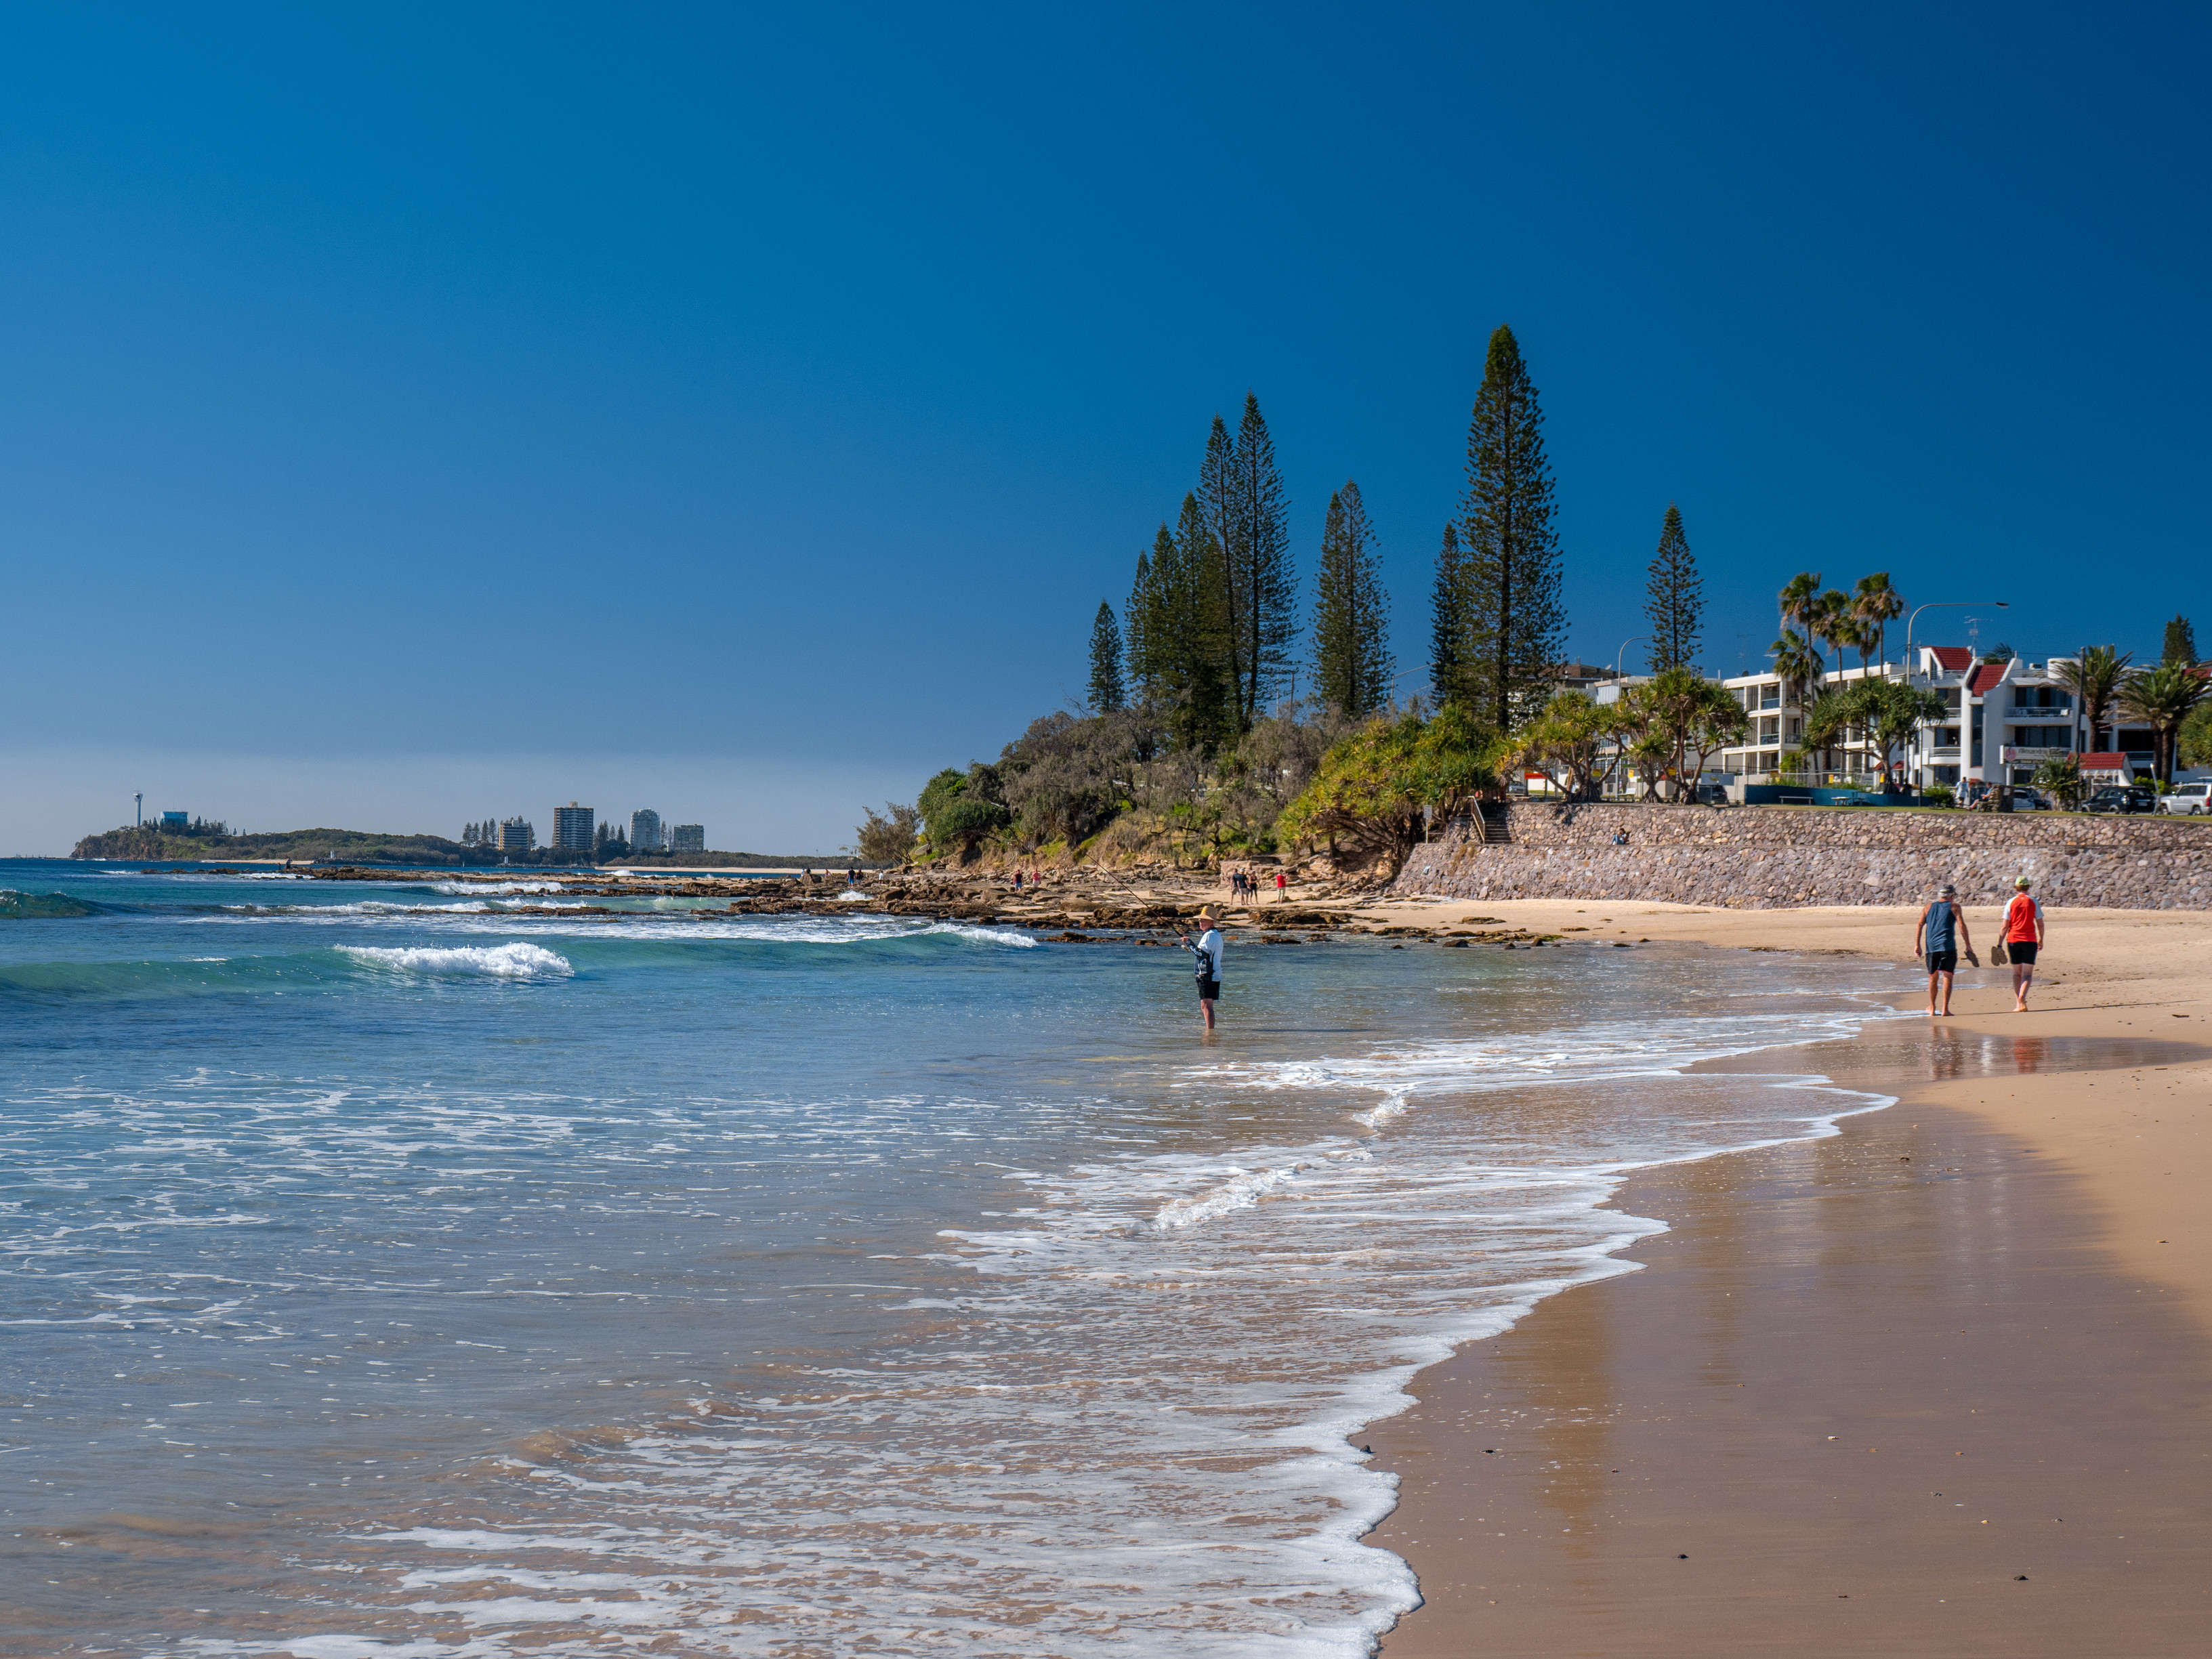 Holiday on the Sunshine Coast With This Maroochydore Guide | Queensland